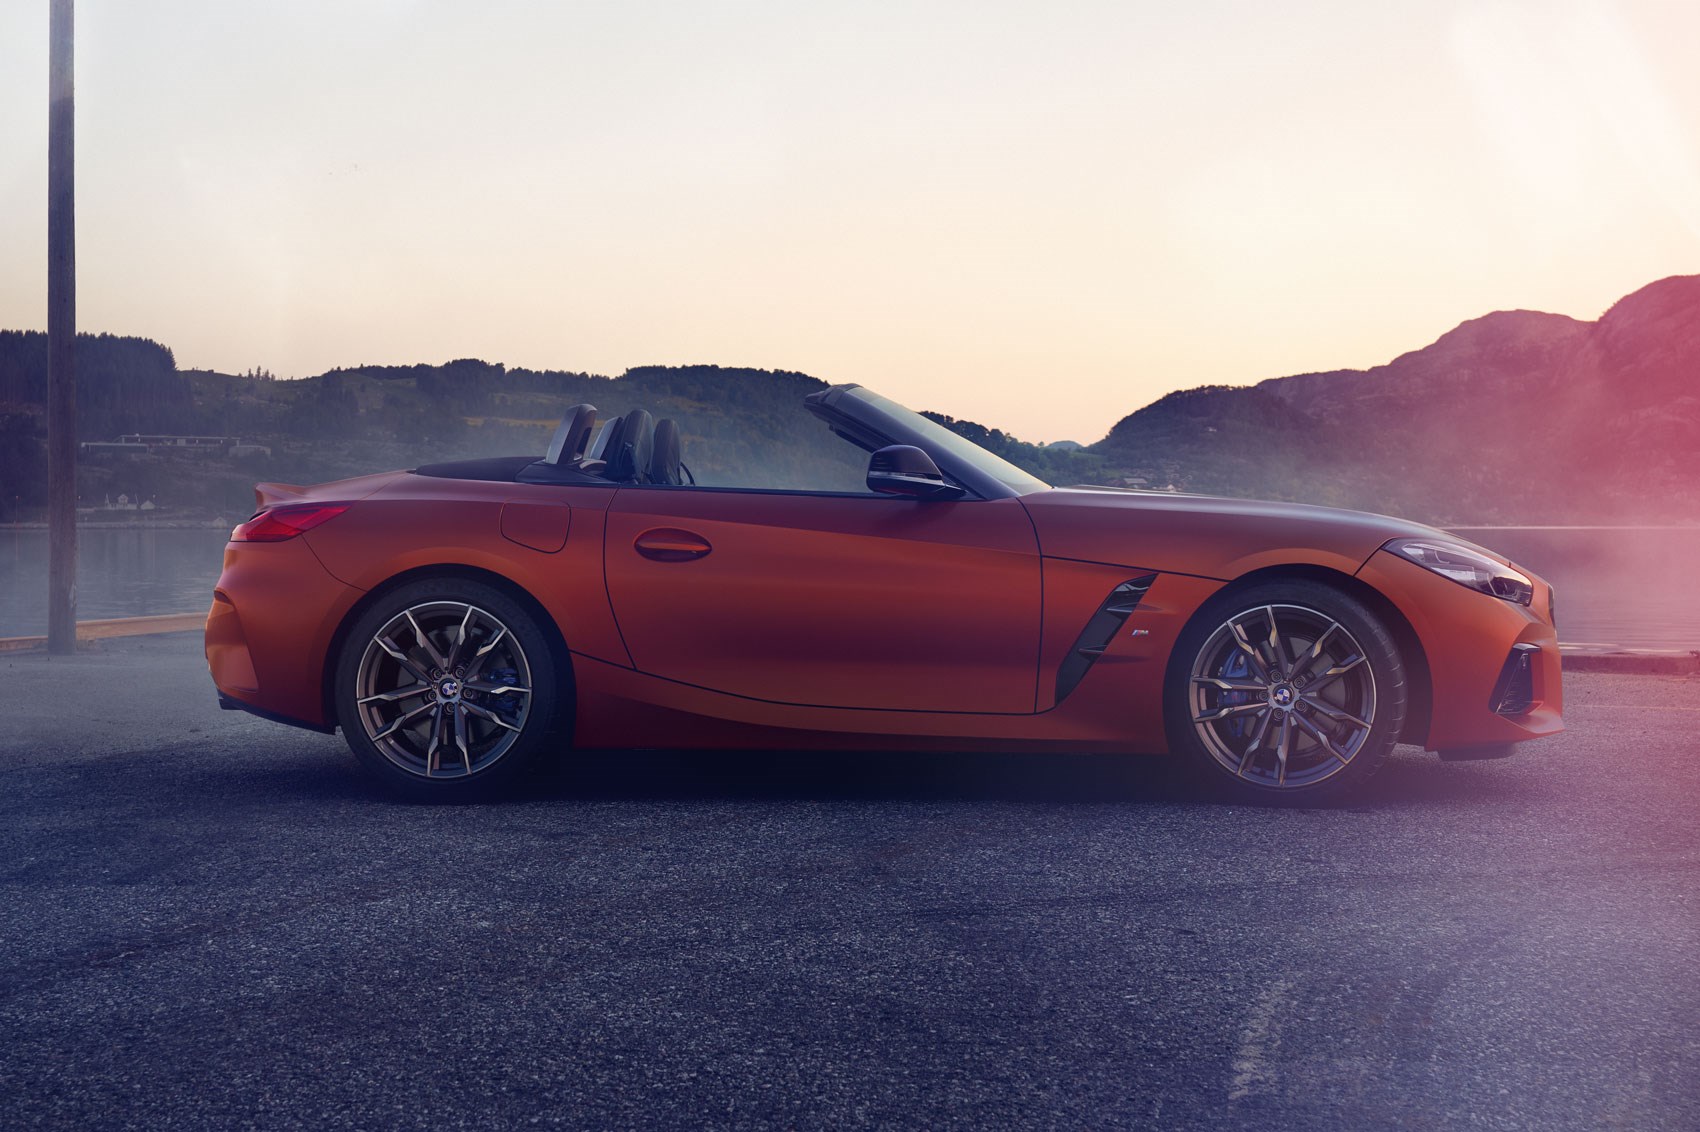 New BMW Z4 roadster (2019): specs, price, performance and more | CAR